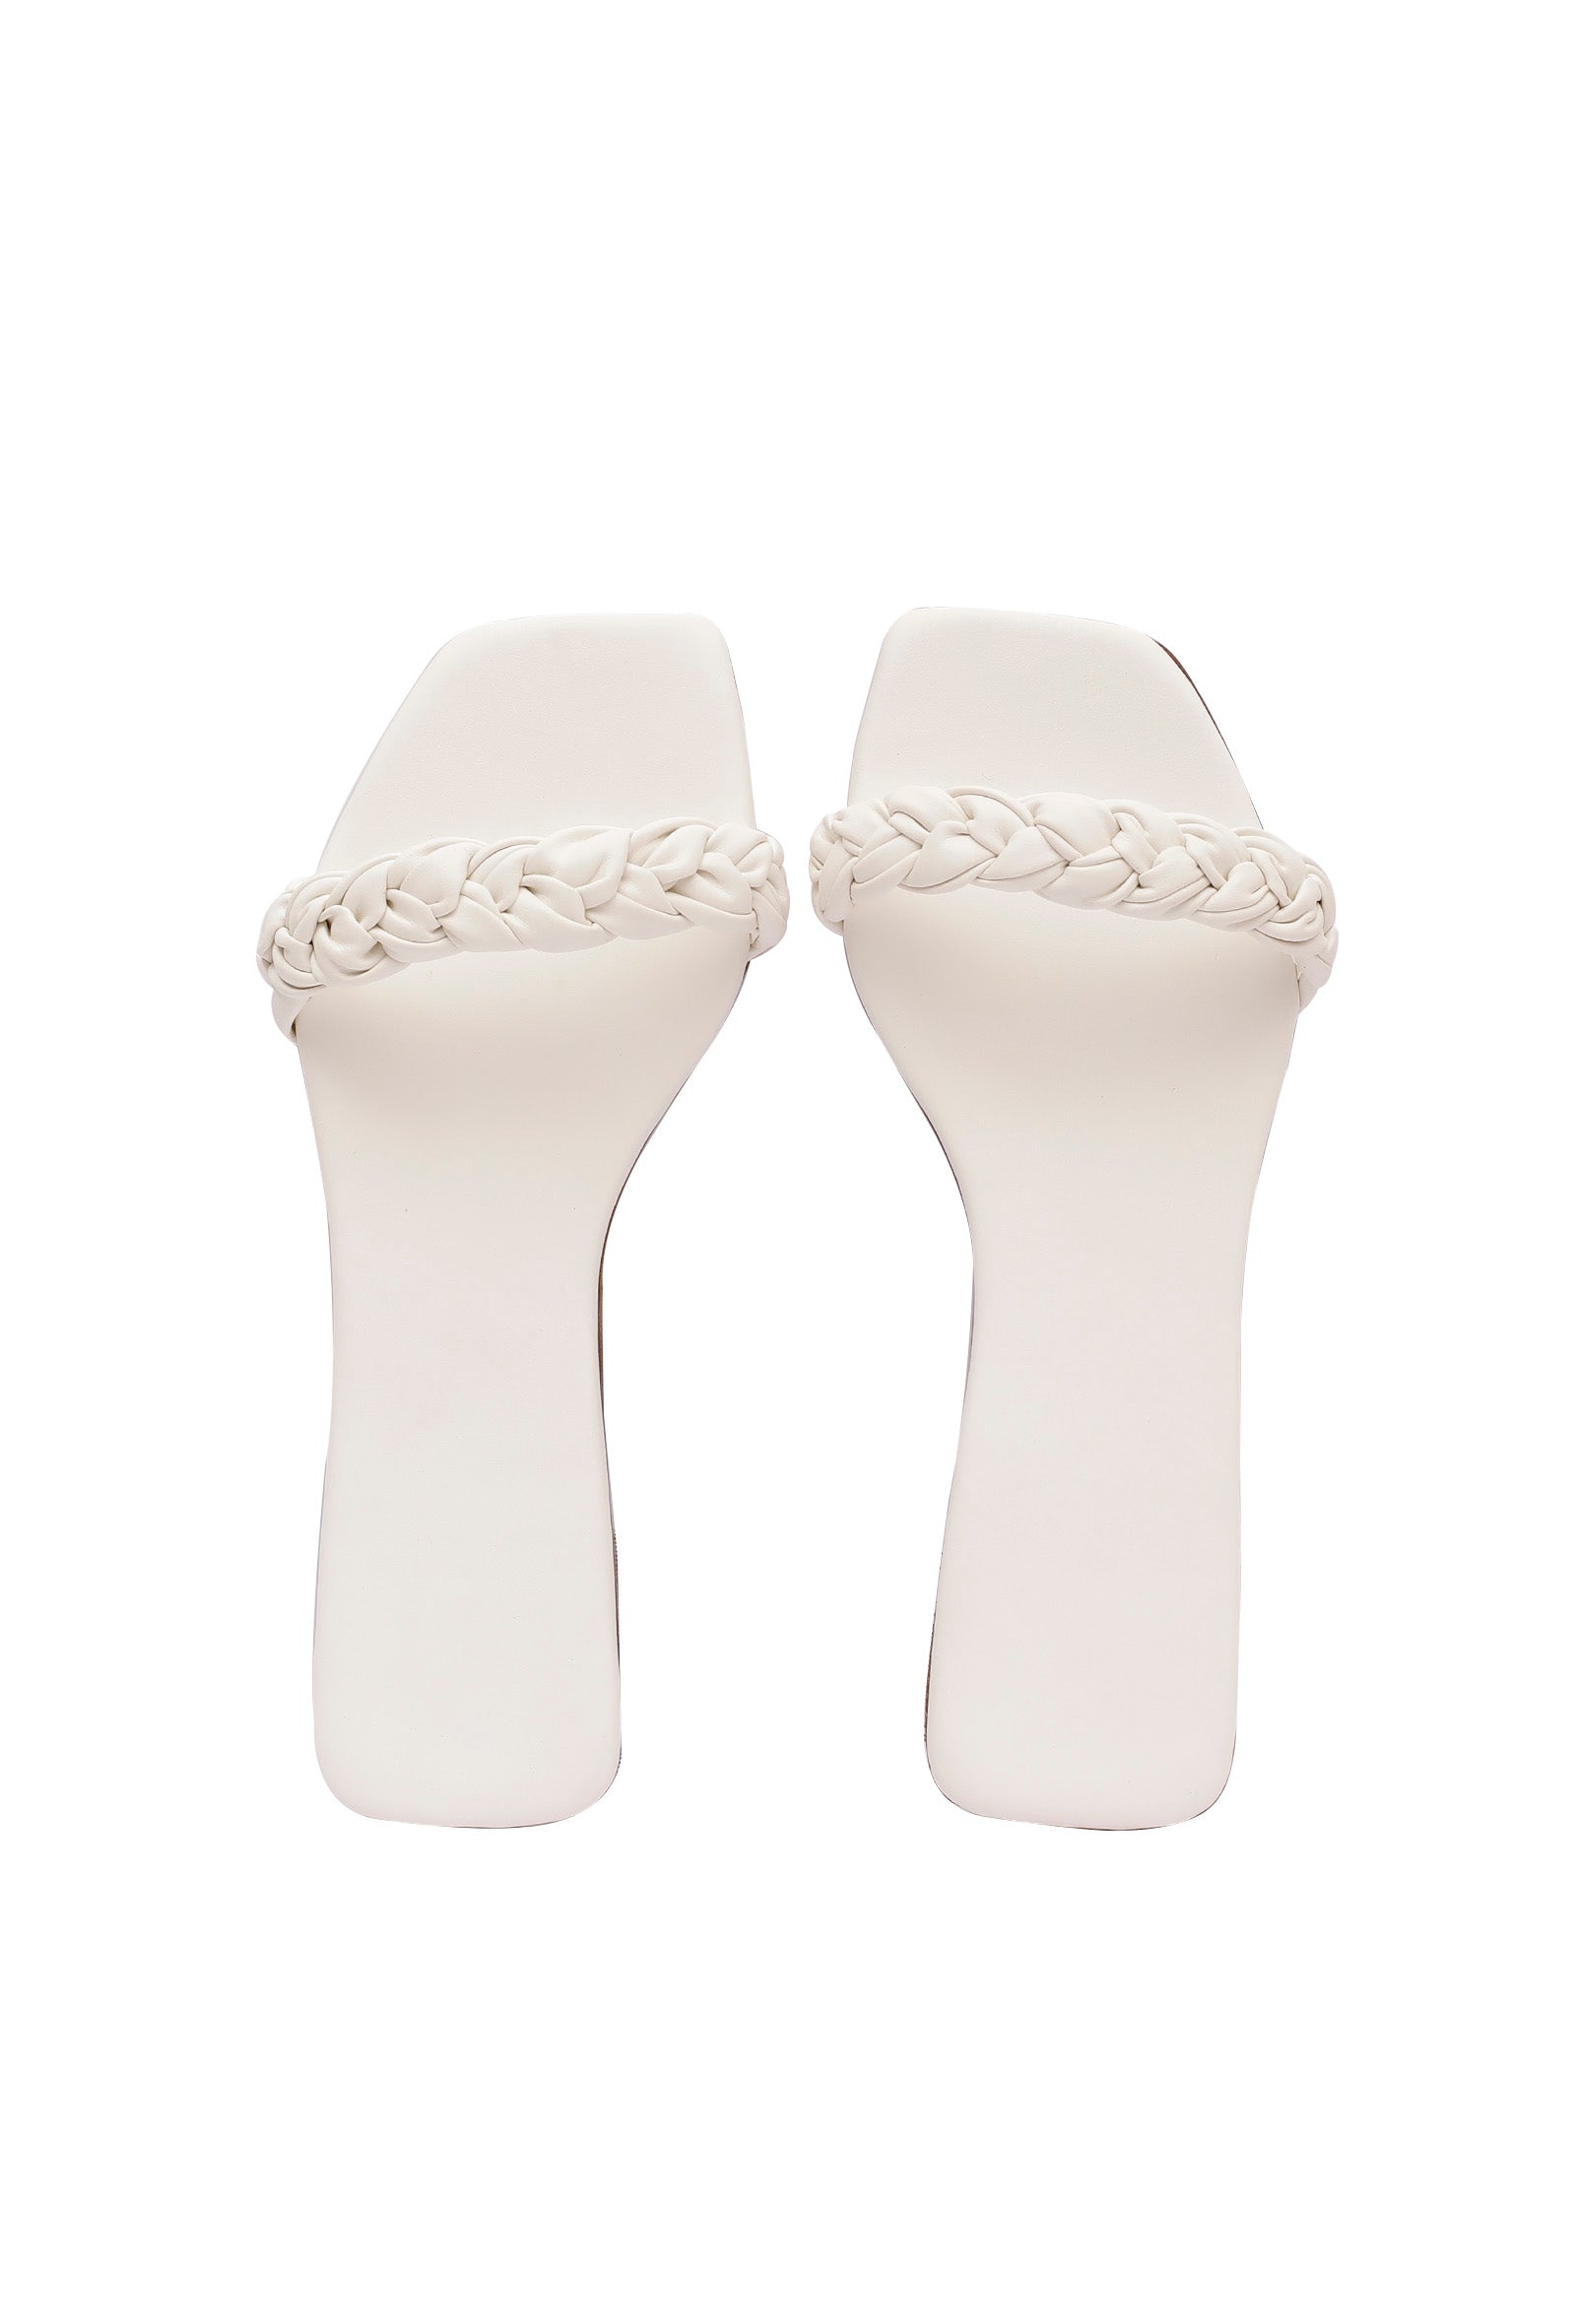 Daisy White Braided Cruelty Free Leather Flats